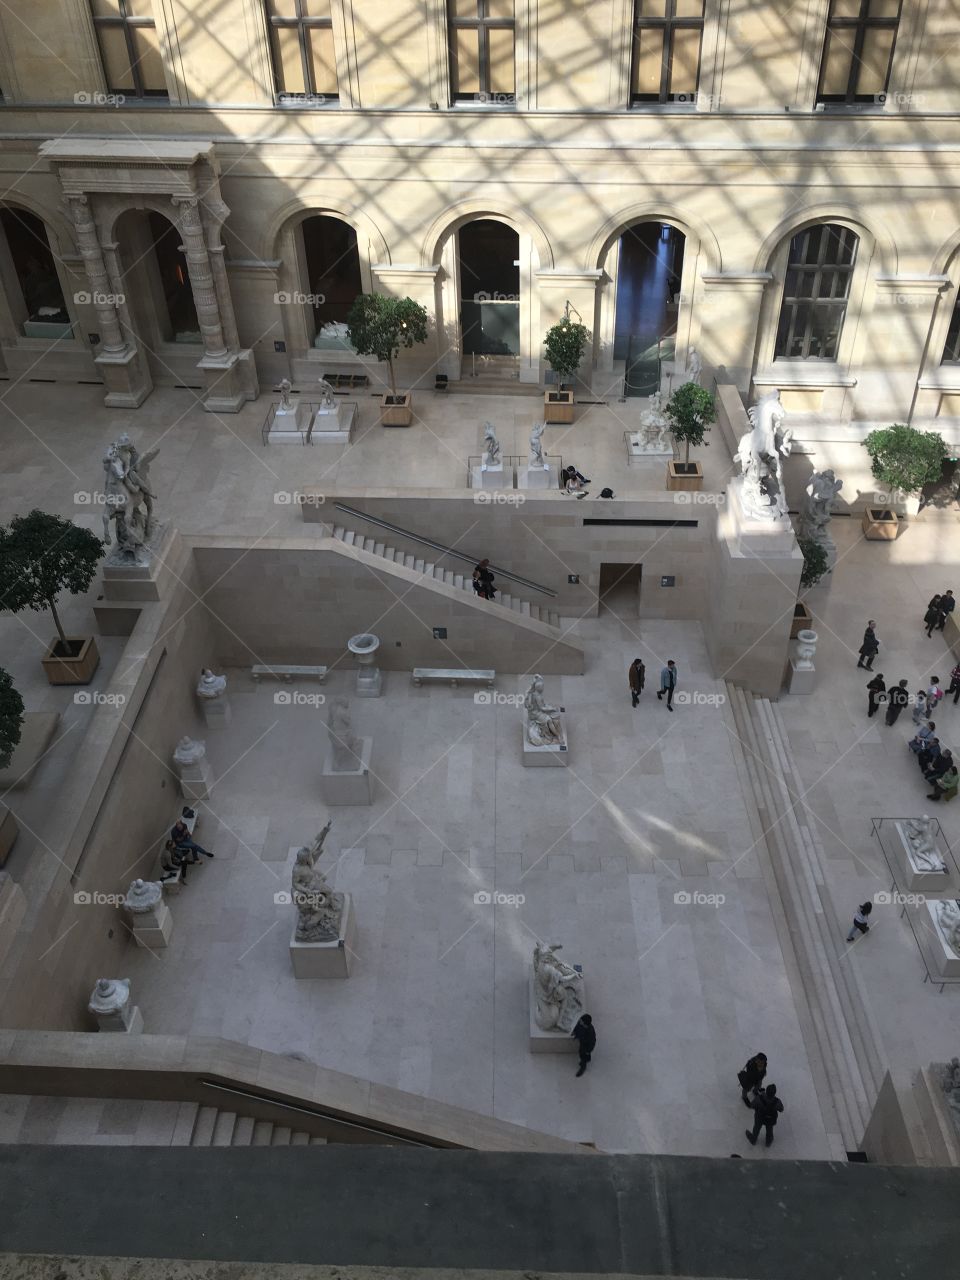 Views from above in the Louvre museum in Paris. 